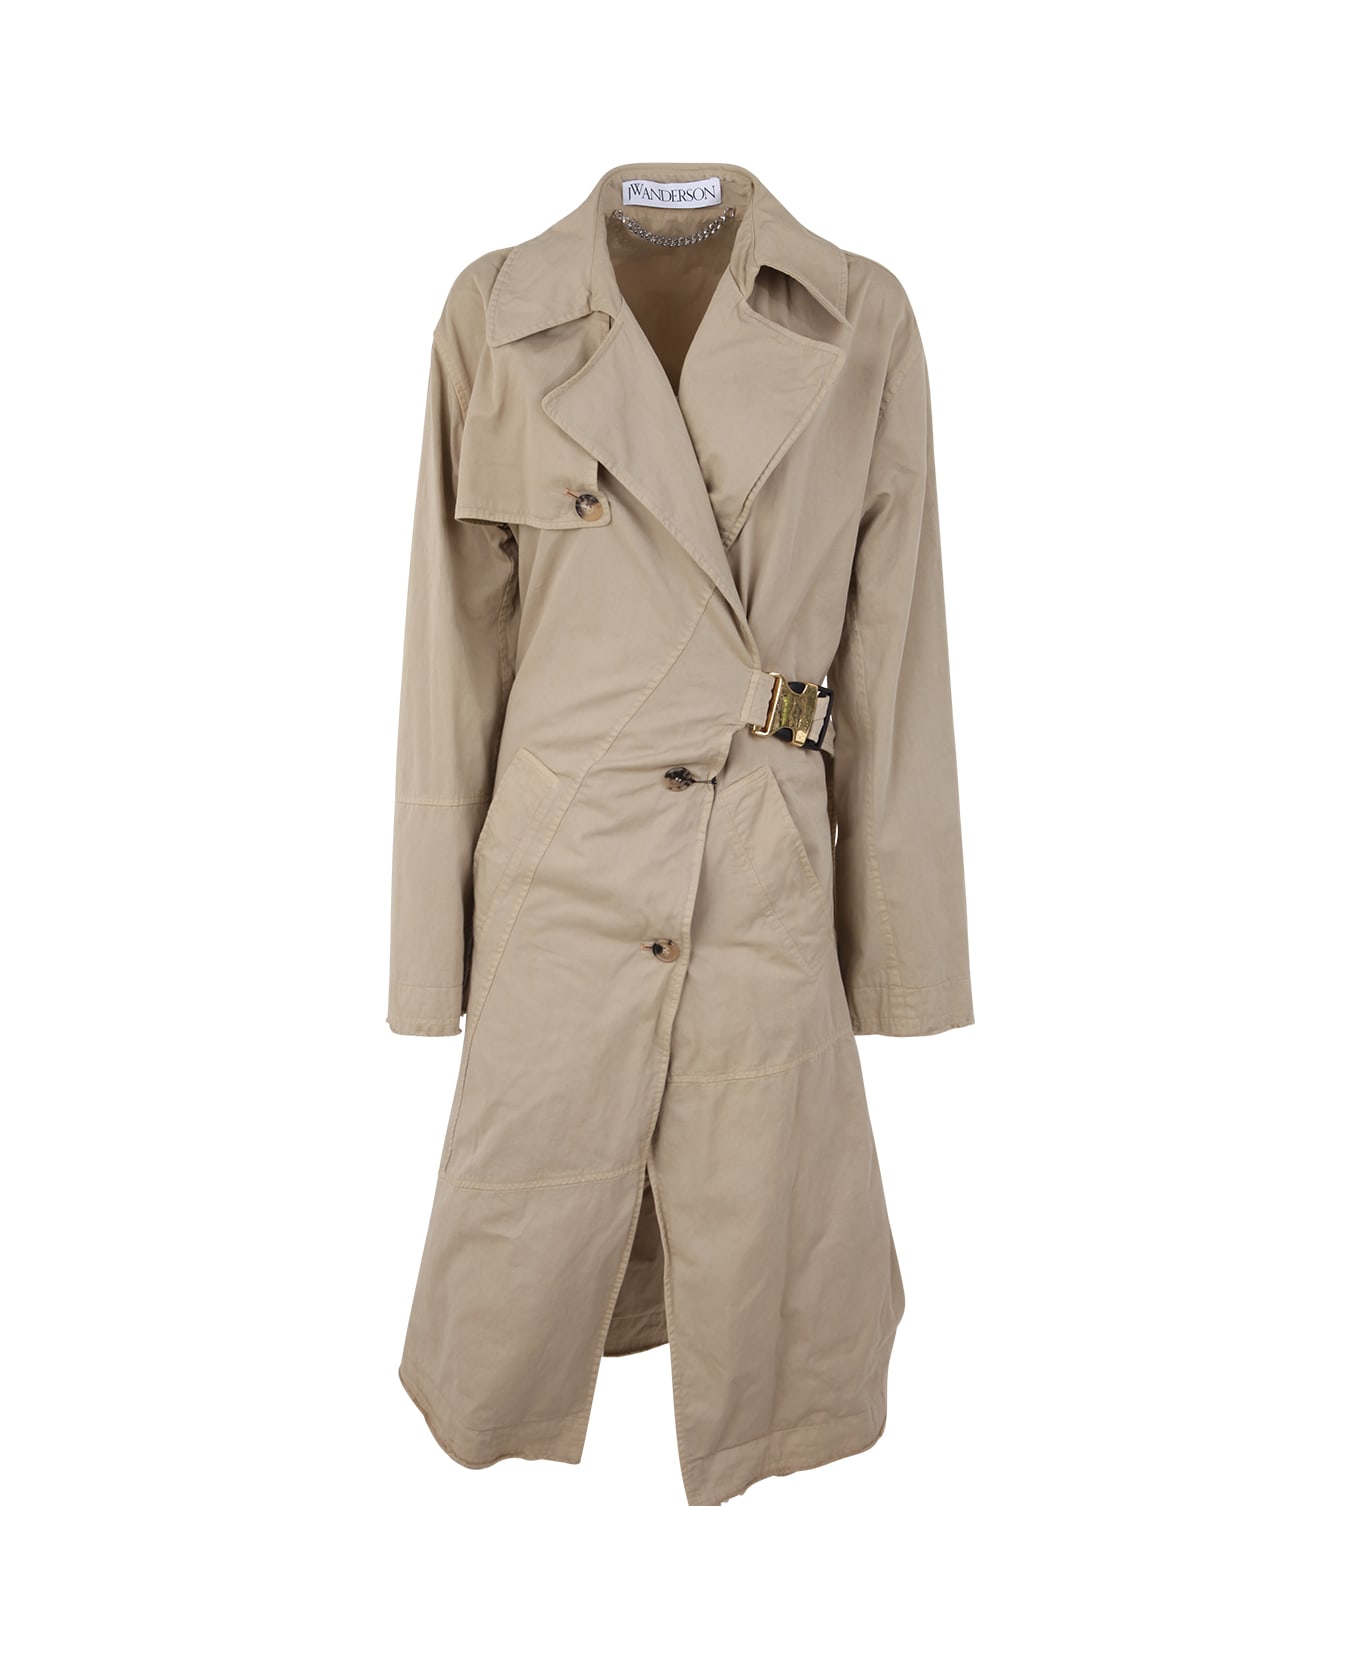 J.W. Anderson Twisted Buckle Trench Coat - Flax コート